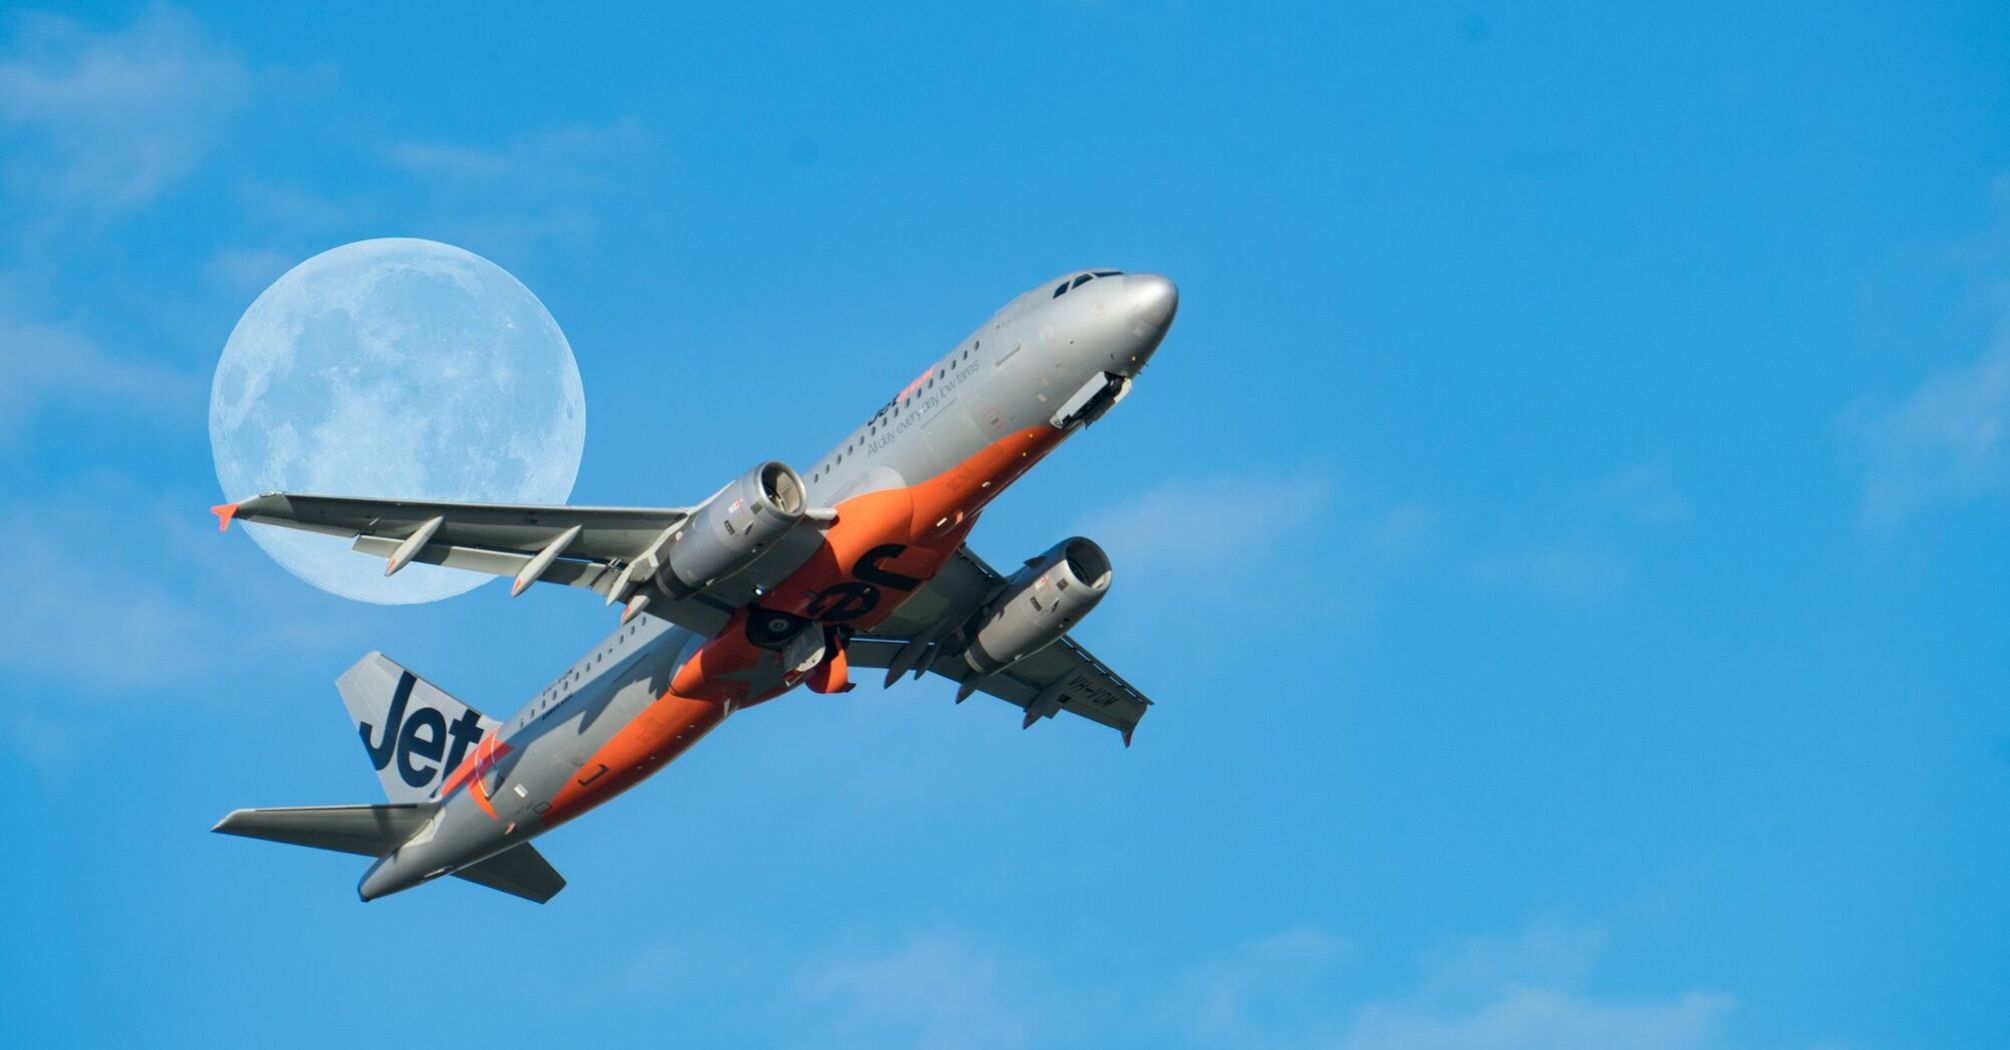 Jetstar Asia airplane in flight with the moon in the background